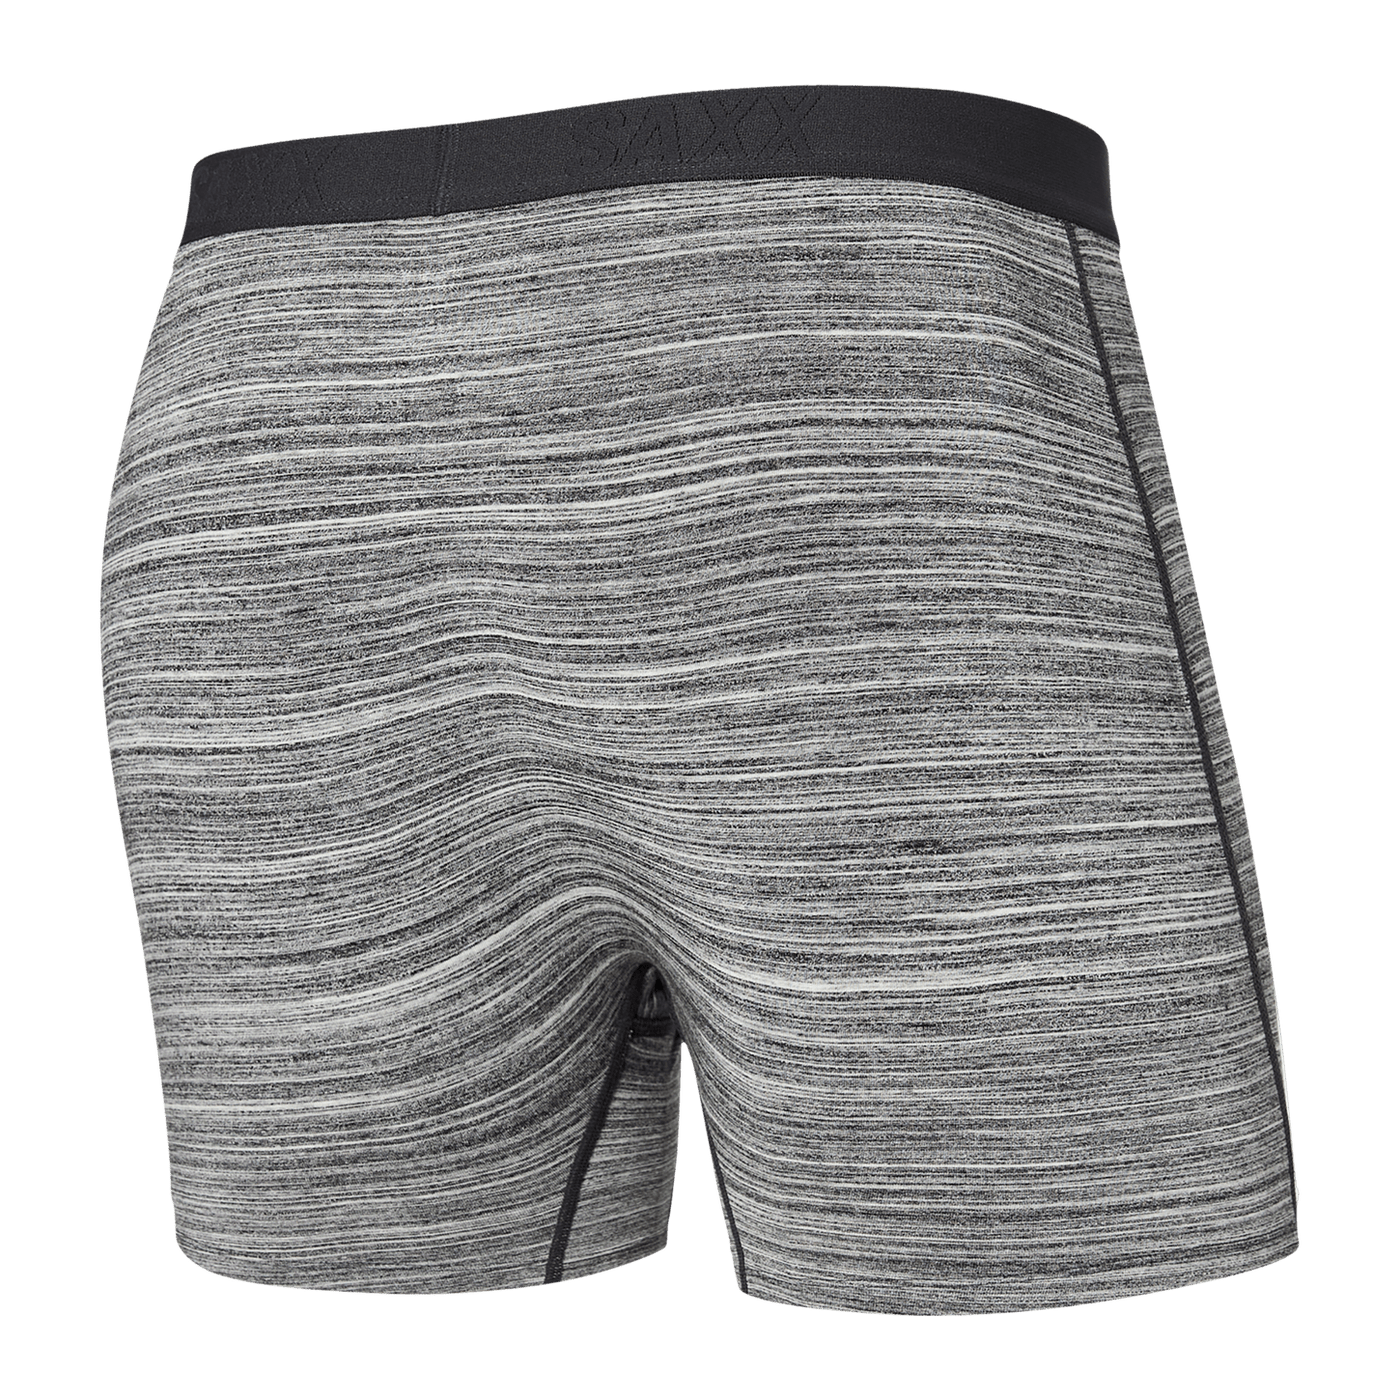 Saxx Ultra Boxers -Spacedye Heather-Grey - The Hockey Shop Source For Sports